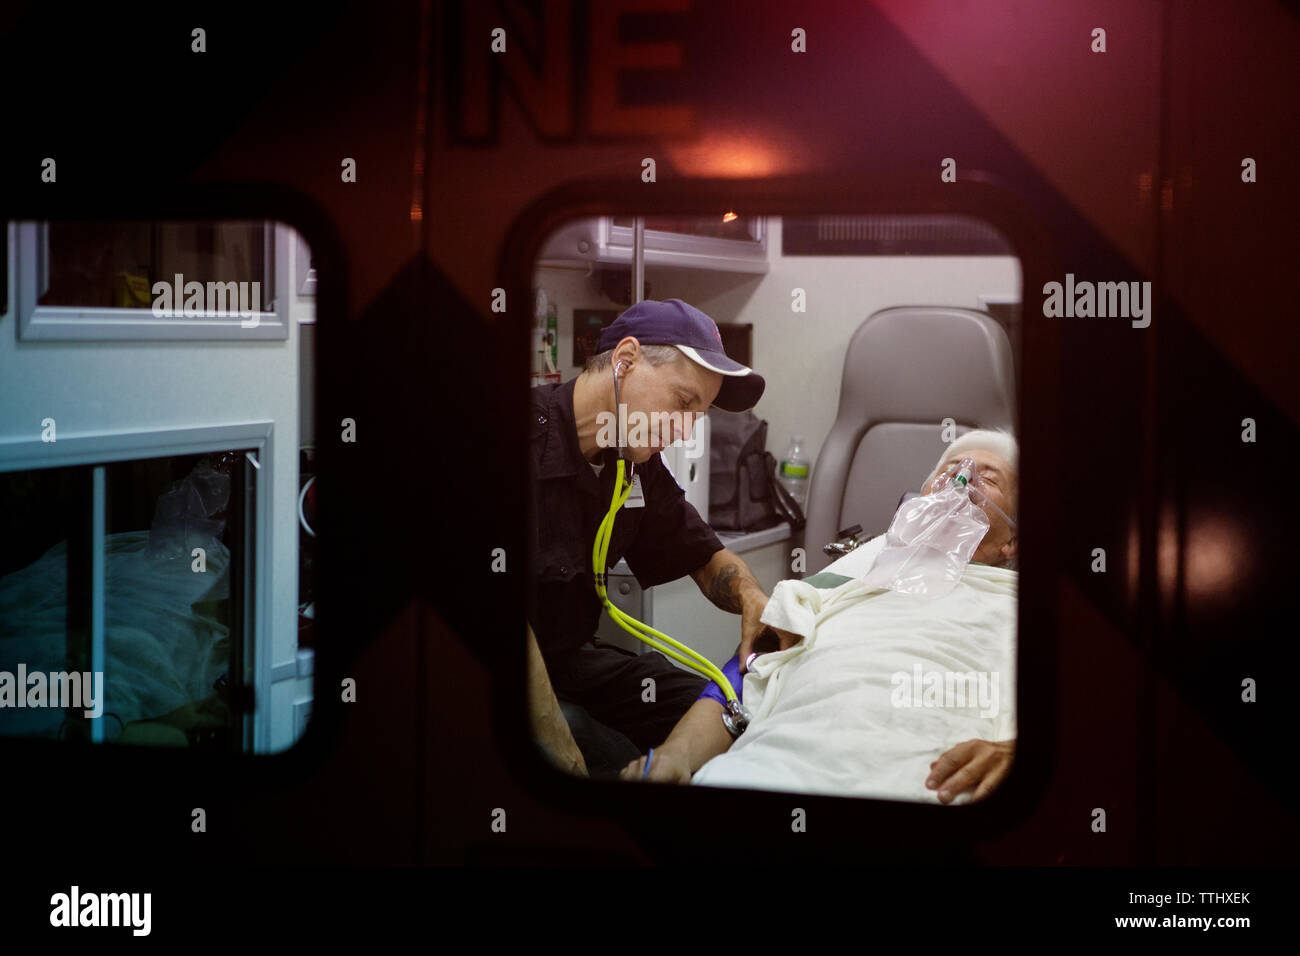 Sauveteur examining patient with stethoscope in ambulance Banque D'Images